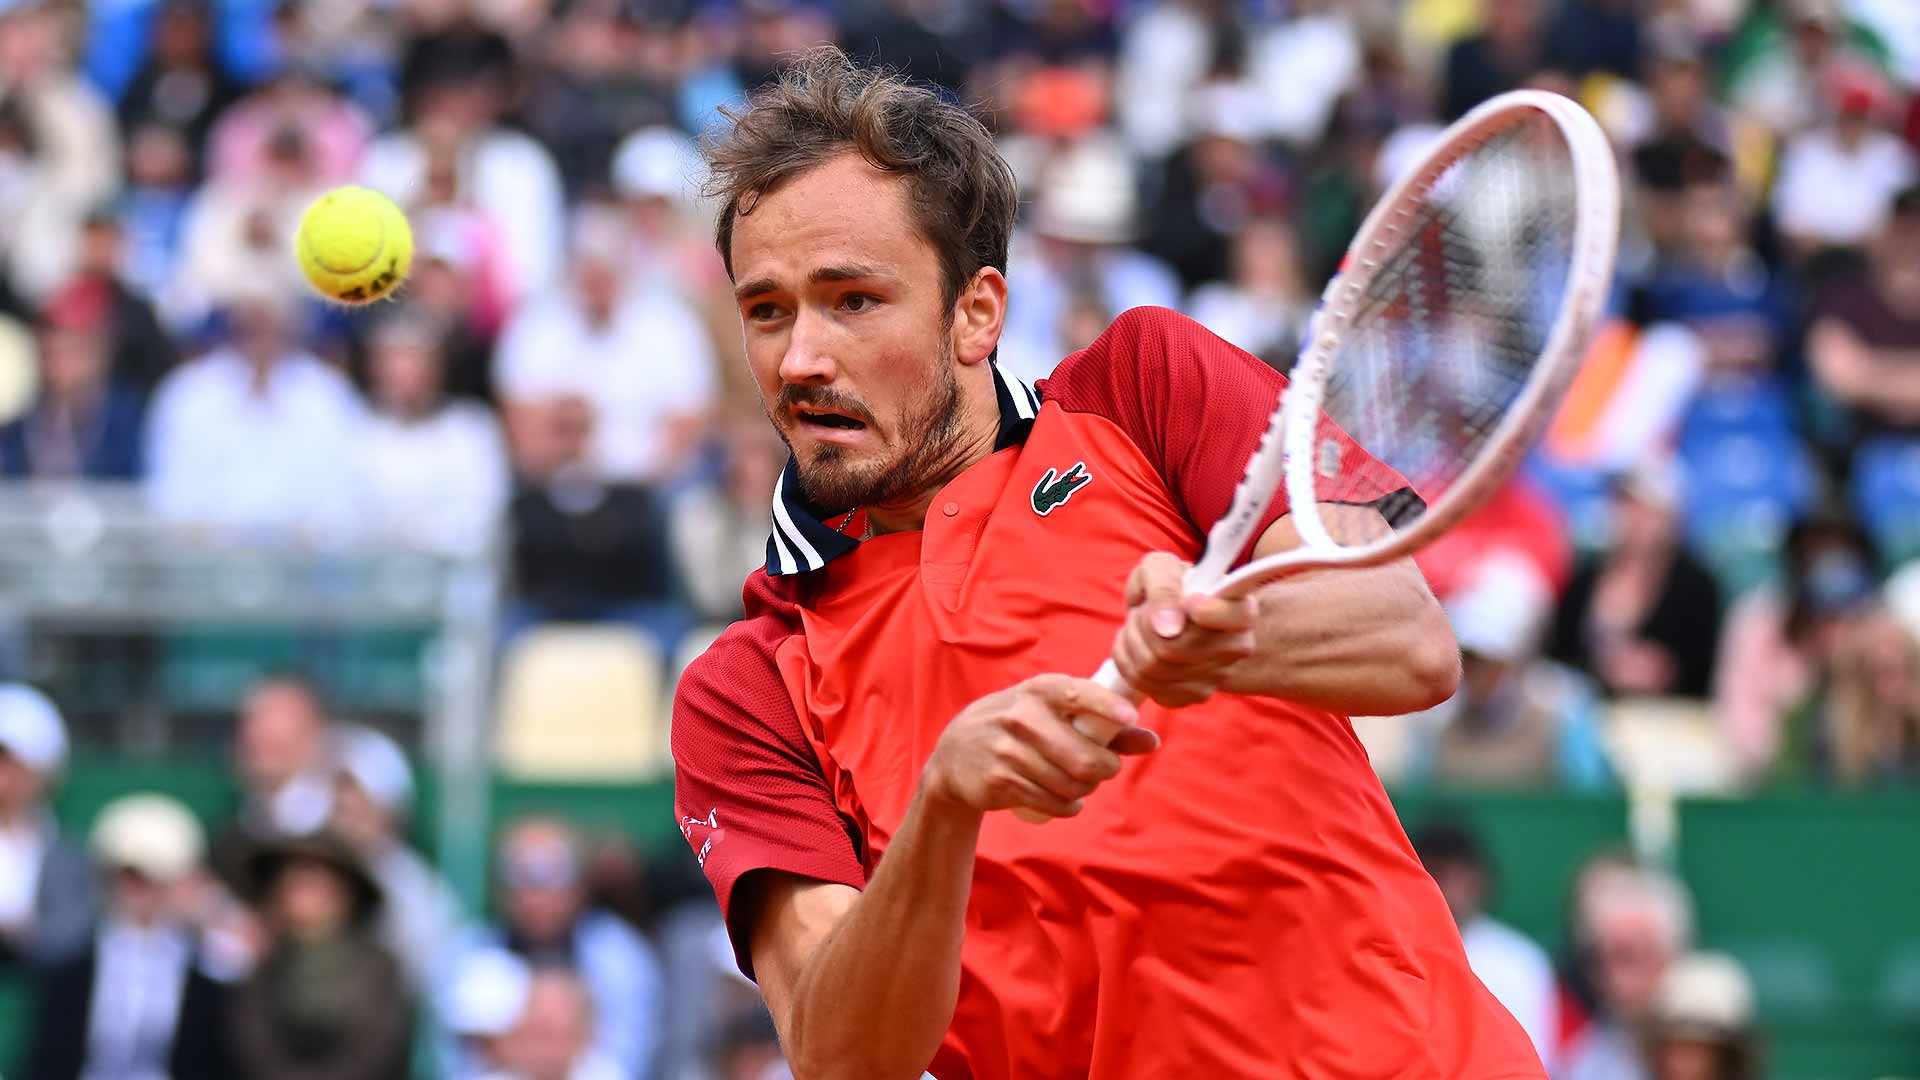 Daniil Medvedev rallies from behind in the second set to defeat Gael Monfils.